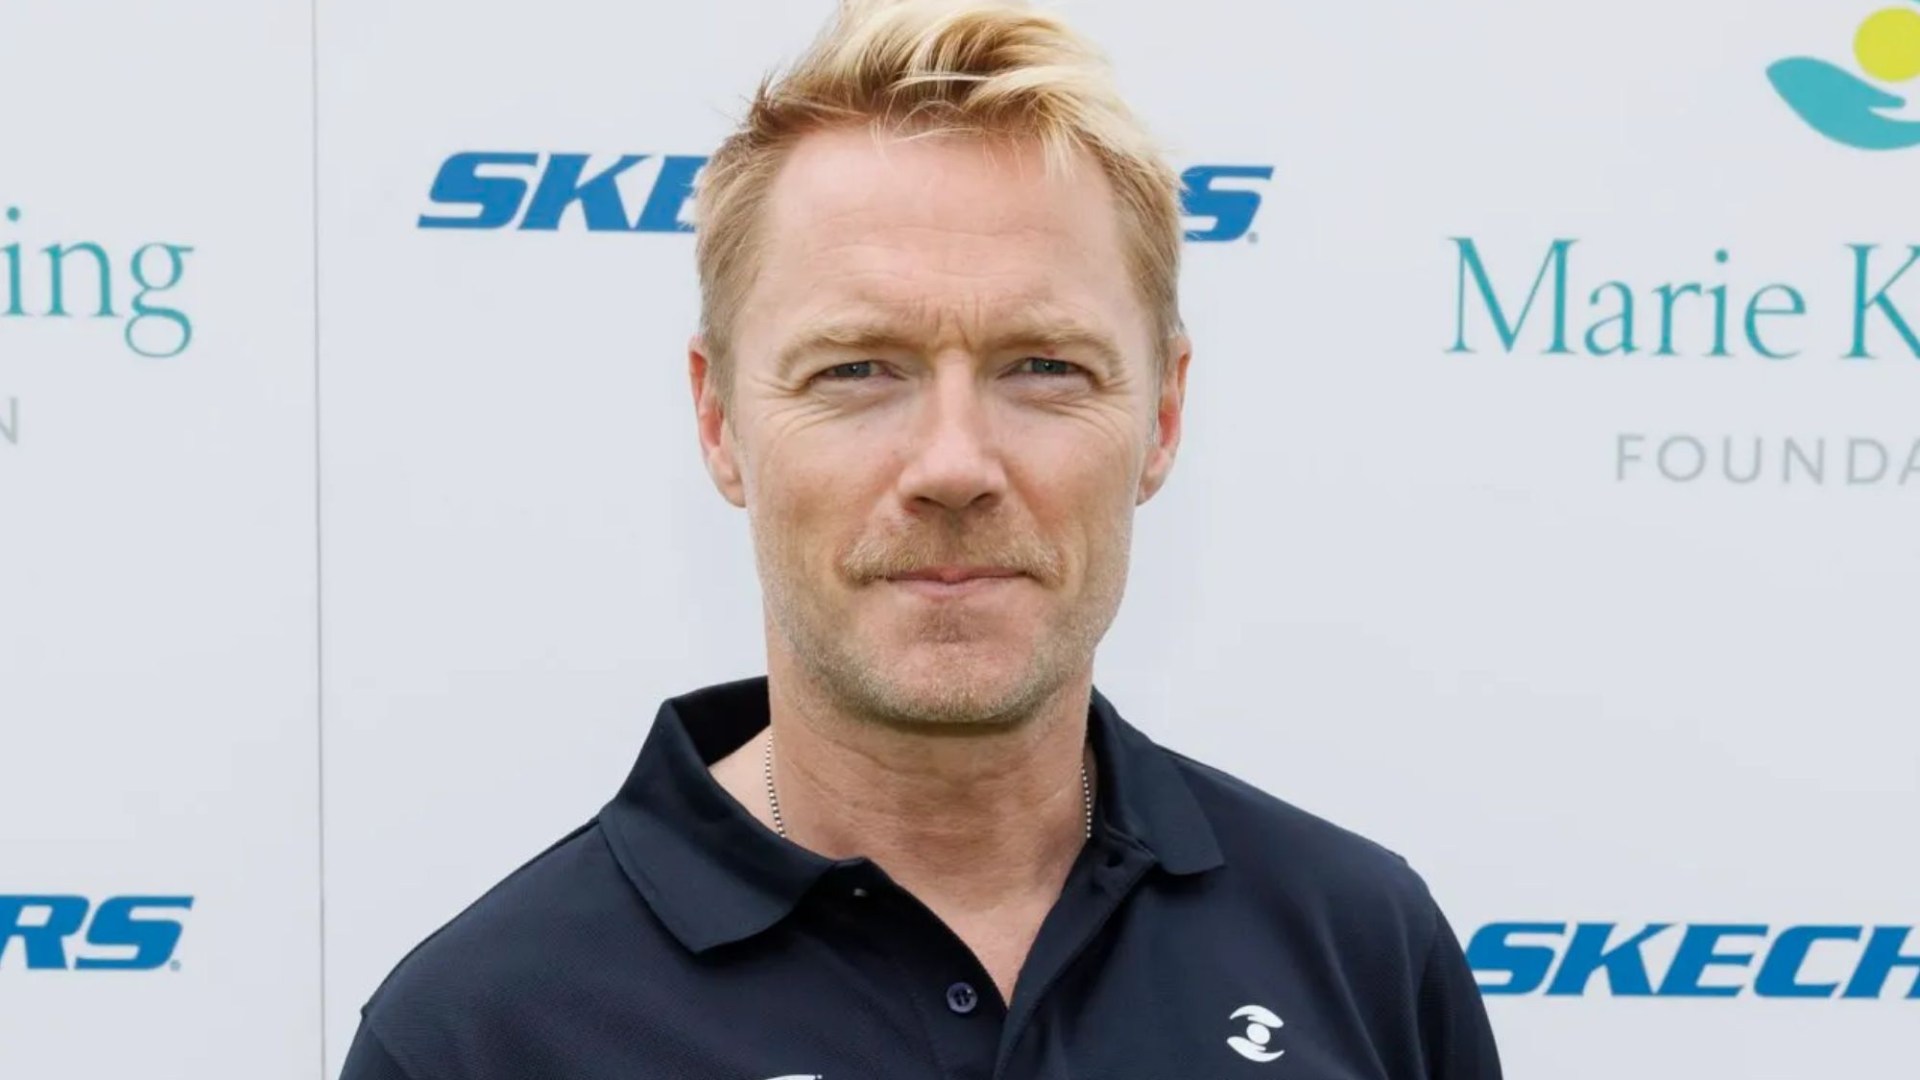 Ronan Keating shares support for wife Storm as she goes through tough recovery after surgery [Video]